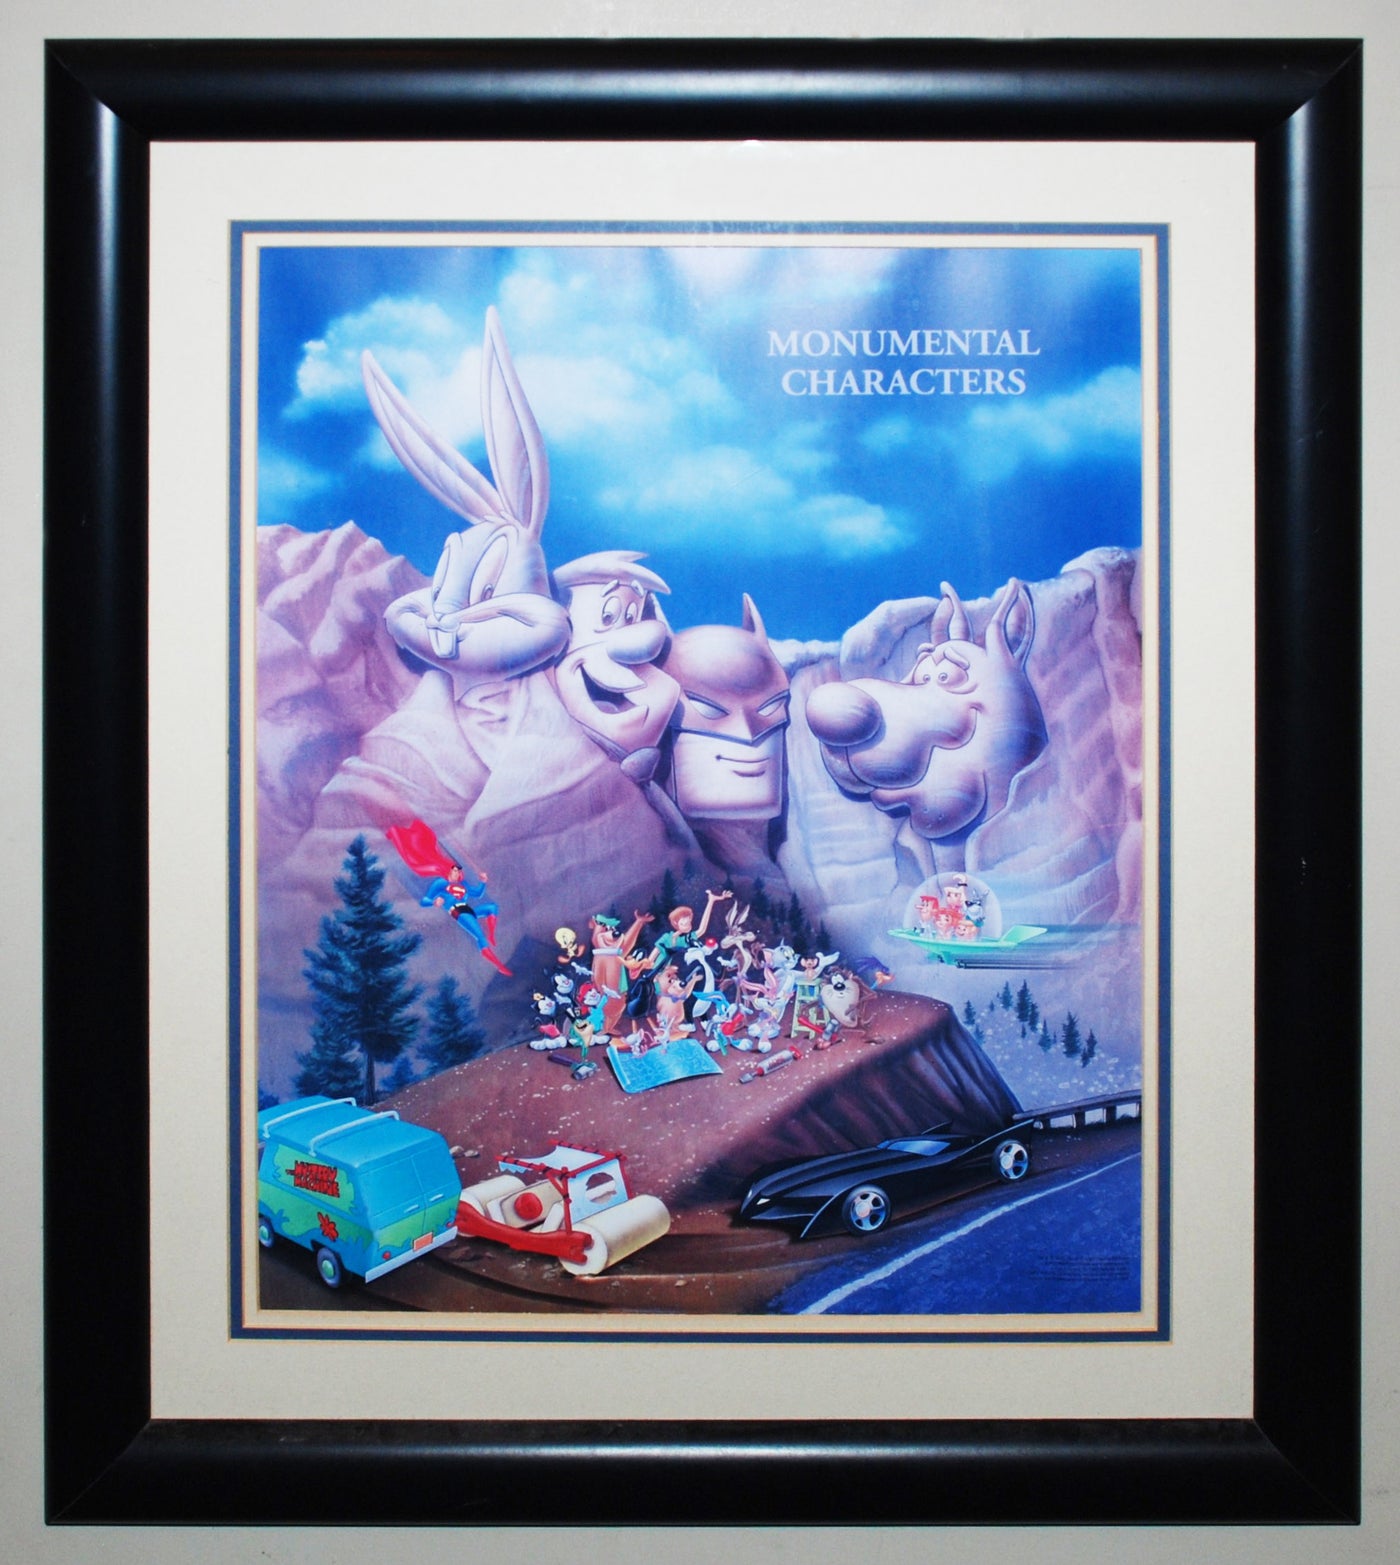 Hanna Barbera Limited Edition Lithograph Monumental Characters